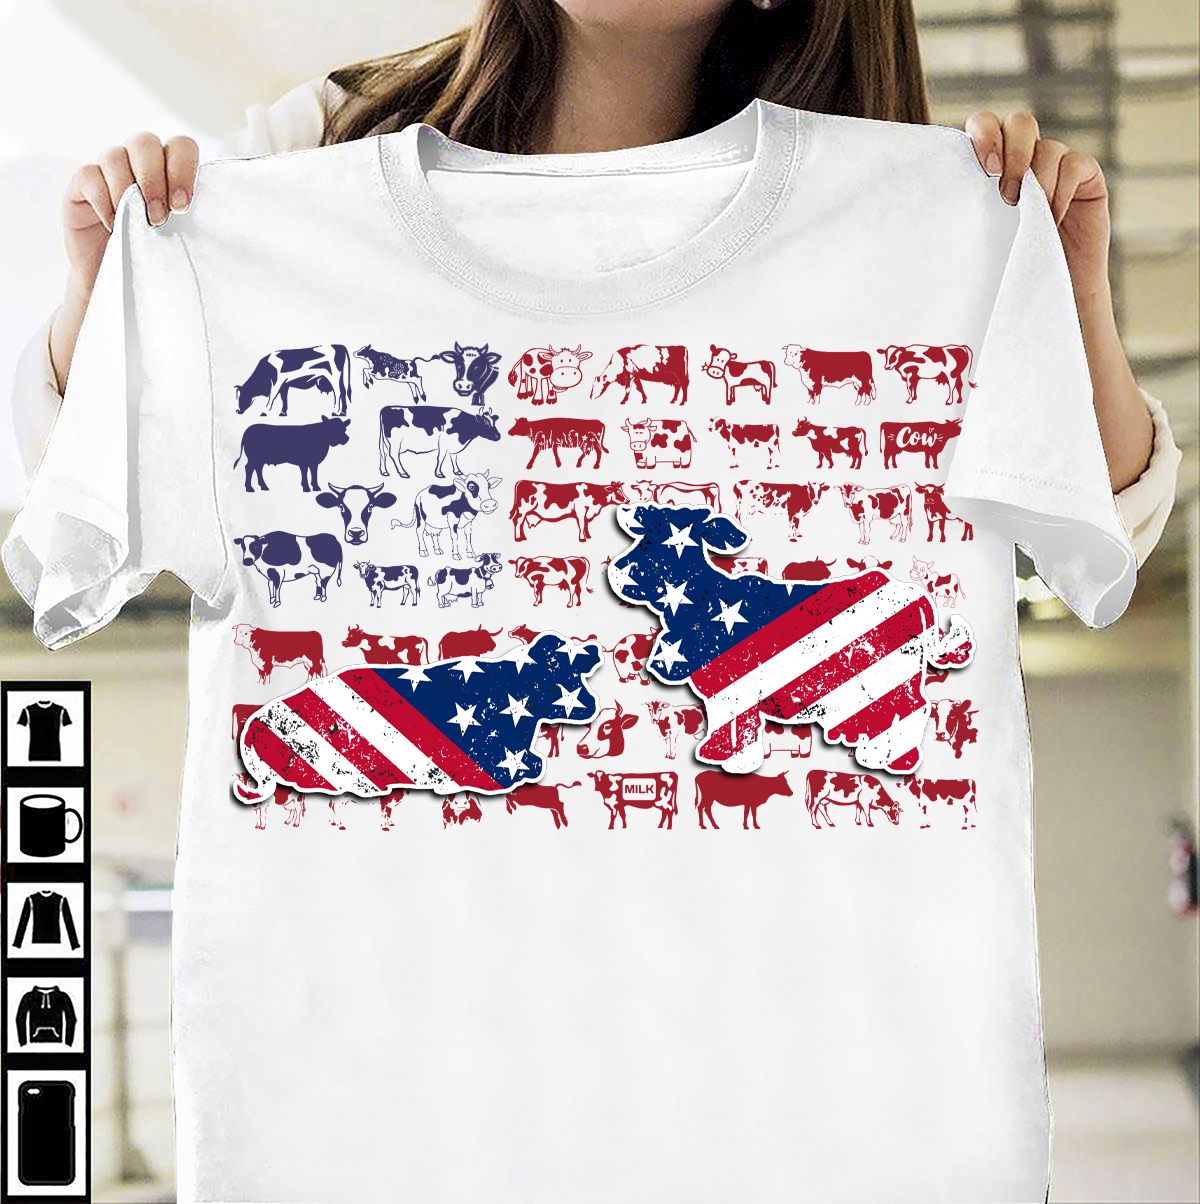 Cow lover, America flag - T-shirt for cow lover